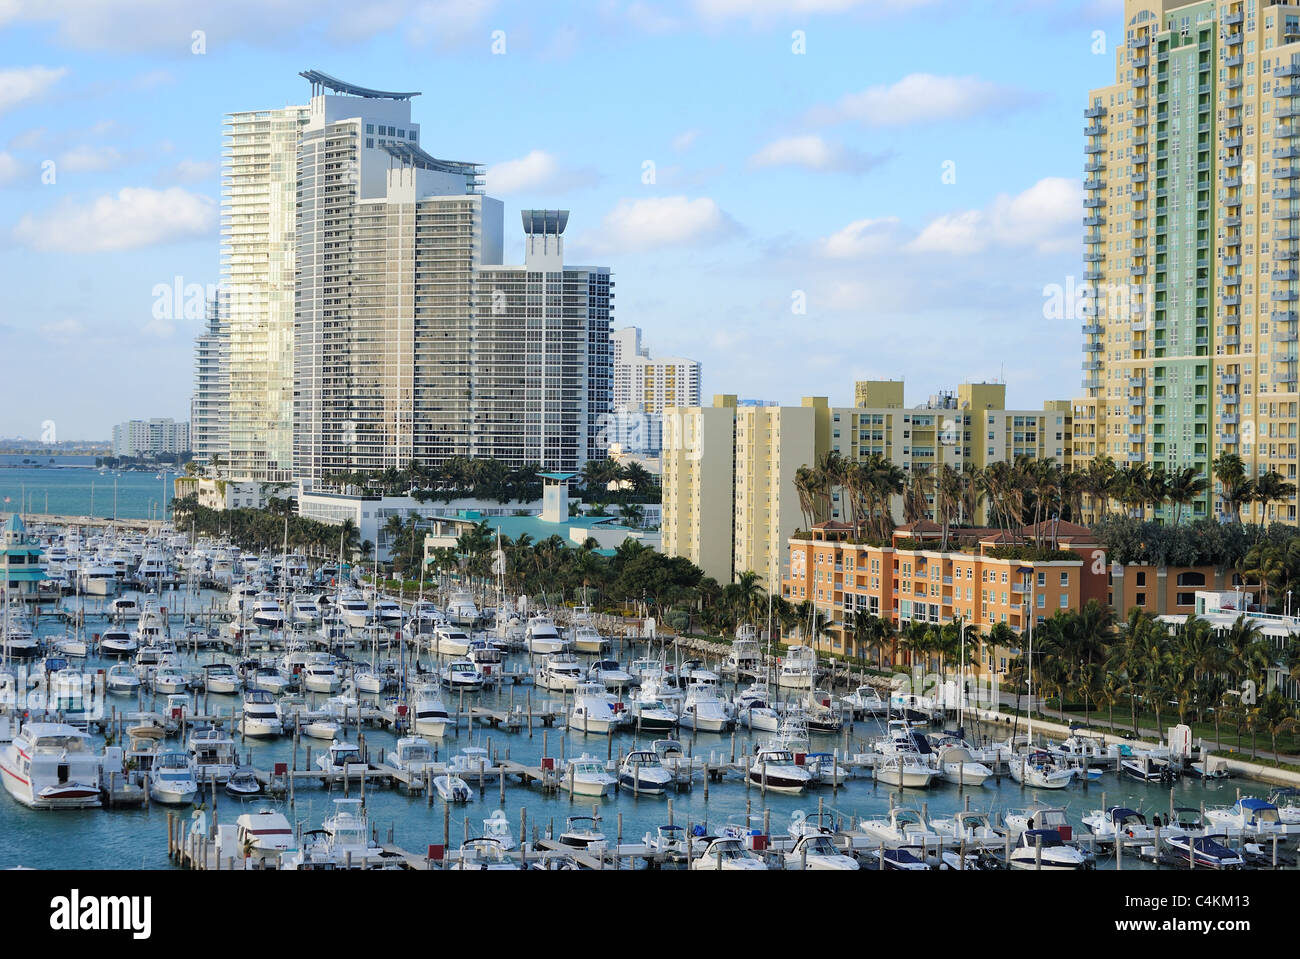 Skyline of the city of Miami, Florida with yachts and boats. Stock Photo